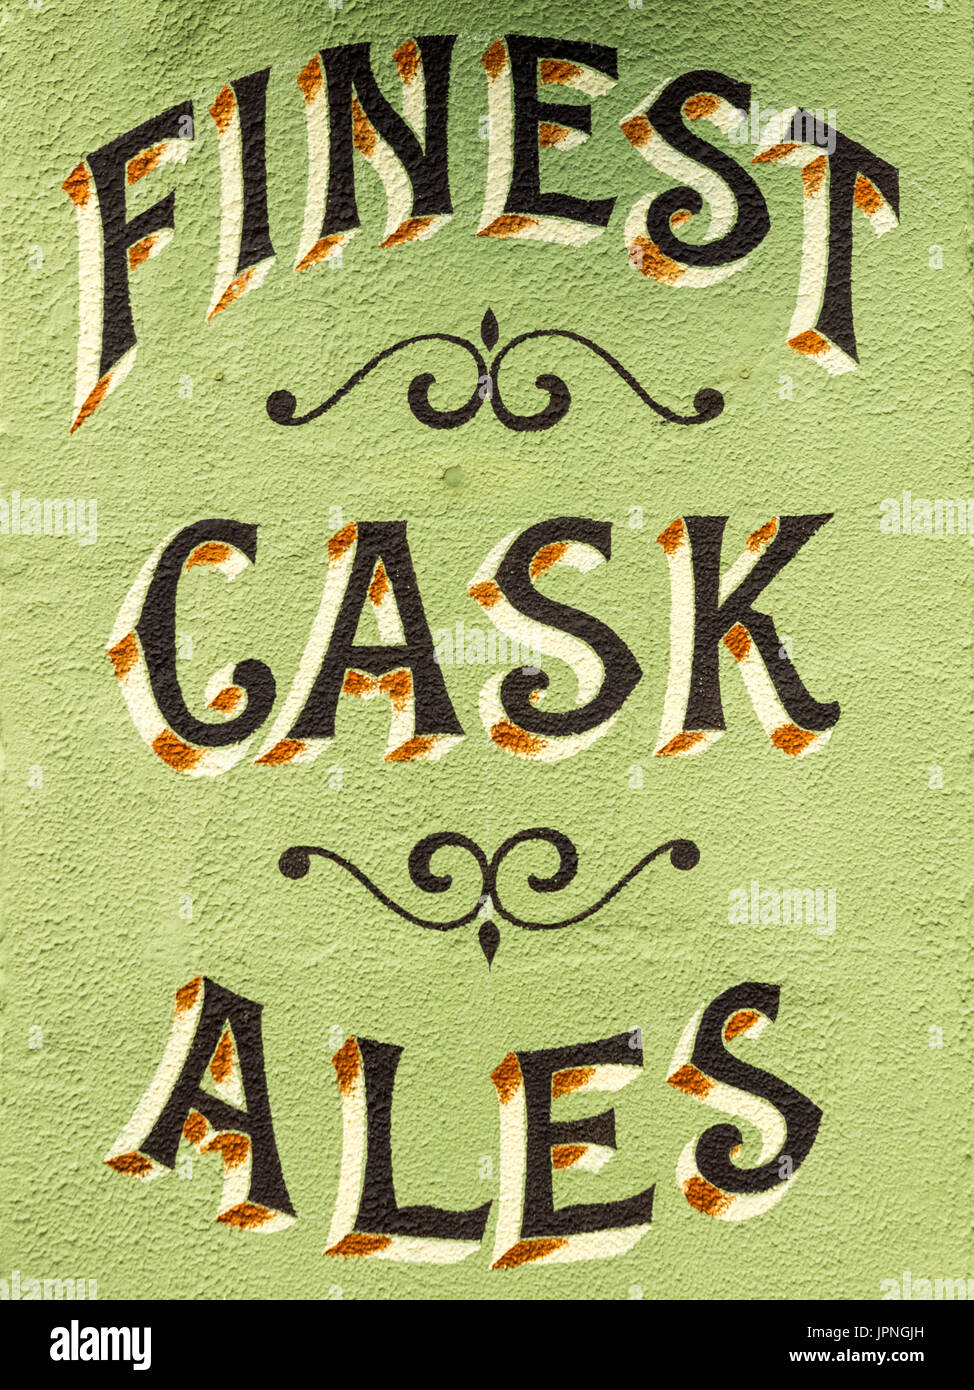 Finest Cask Ales - Painted Sign advertising Finest Cask Ales on the wall of a pub in Cambridge UK Stock Photo